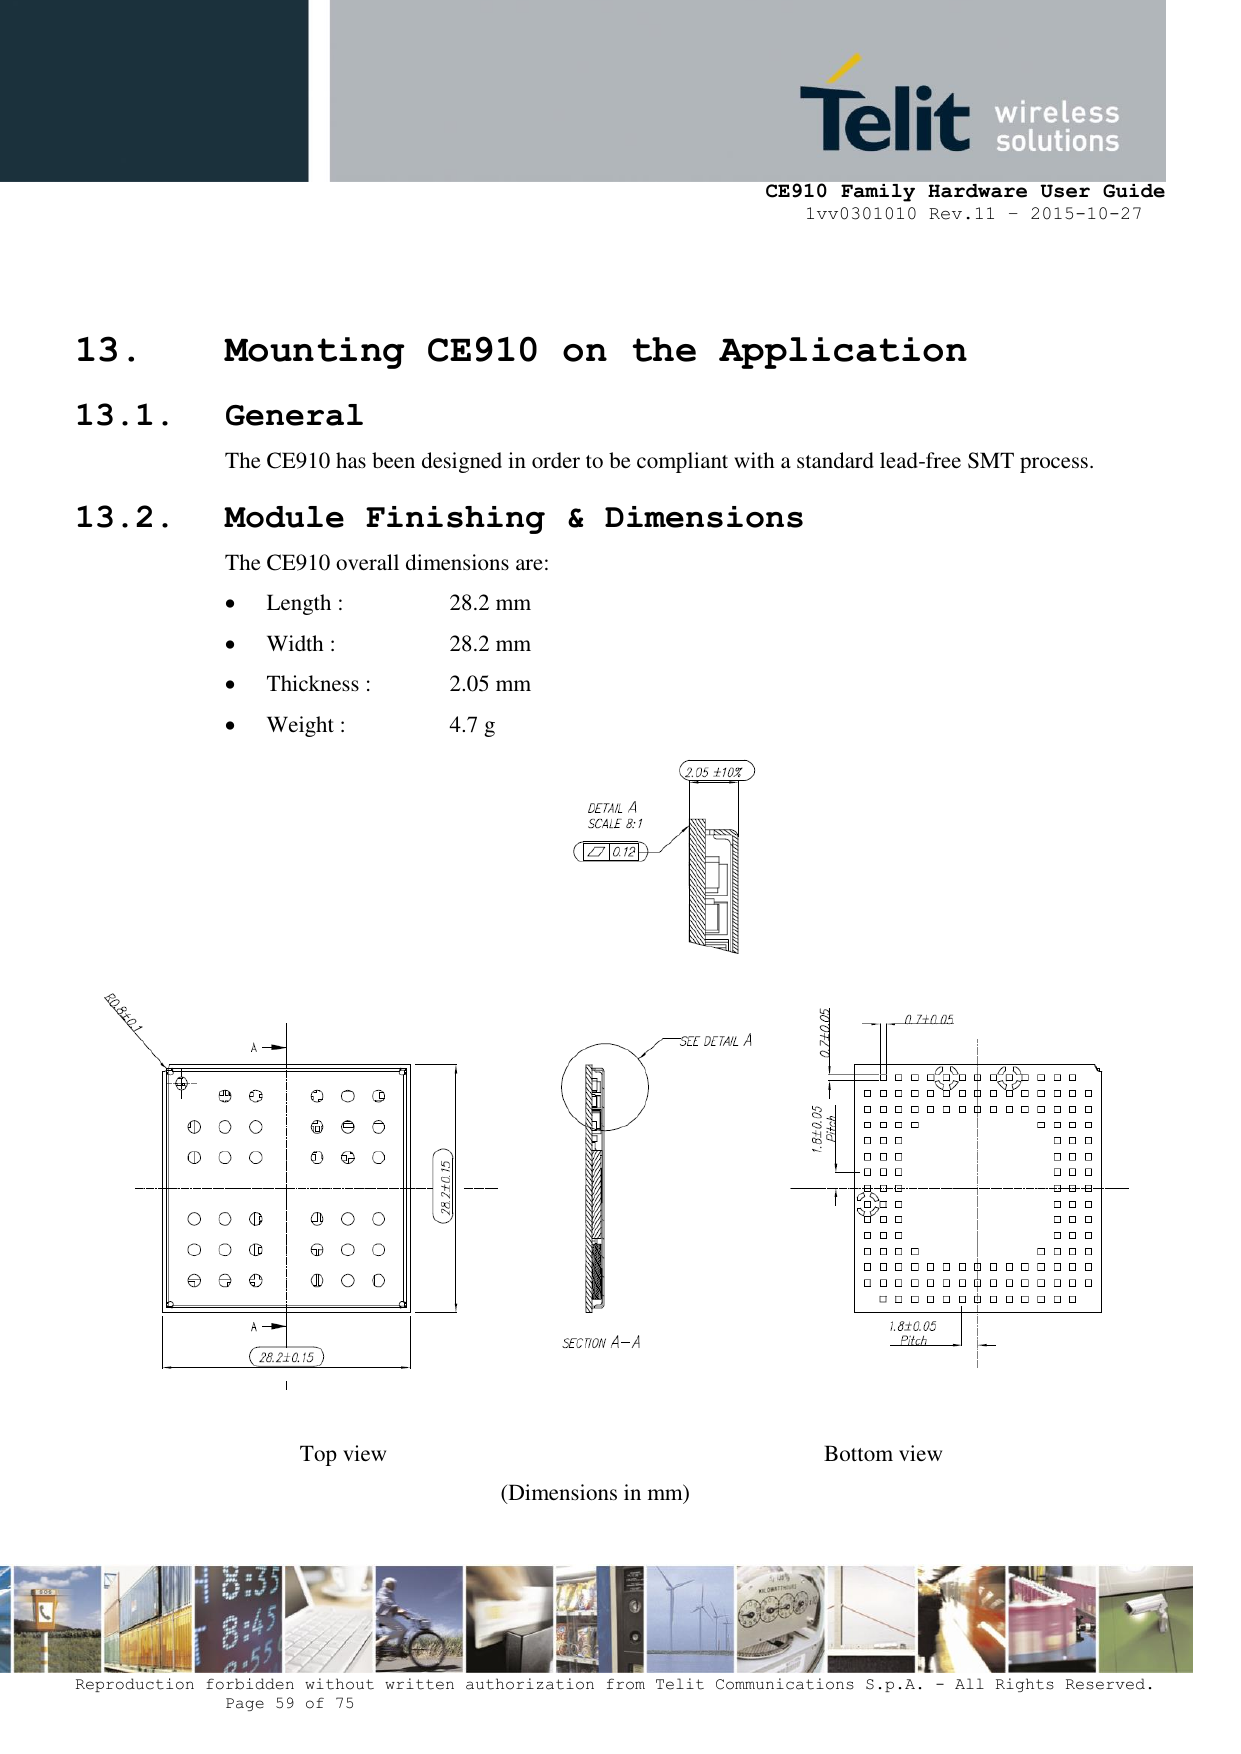     CE910 Family Hardware User Guide 1vv0301010 Rev.11 – 2015-10-27 Reproduction forbidden without written authorization from Telit Communications S.p.A. - All Rights Reserved.    Page 59 of 75                                                     13. Mounting CE910 on the Application 13.1. General The CE910 has been designed in order to be compliant with a standard lead-free SMT process. 13.2. Module Finishing &amp; Dimensions The CE910 overall dimensions are:  Length :    28.2 mm  Width :    28.2 mm  Thickness :   2.05 mm  Weight :    4.7 g   Top view                    Bottom view (Dimensions in mm)  